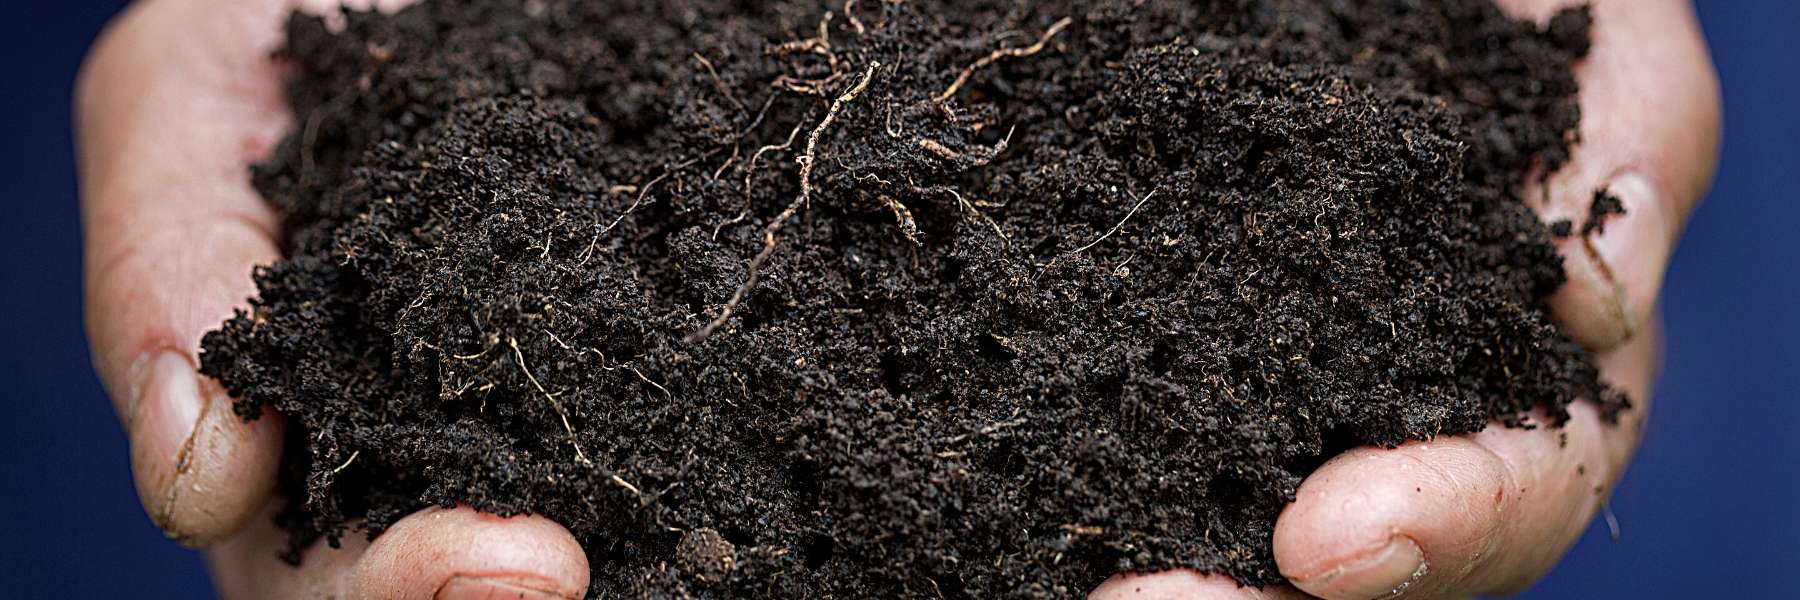 What are the benefits of humic substances for soil and plants? - What are the benefits of humic substances for plants?